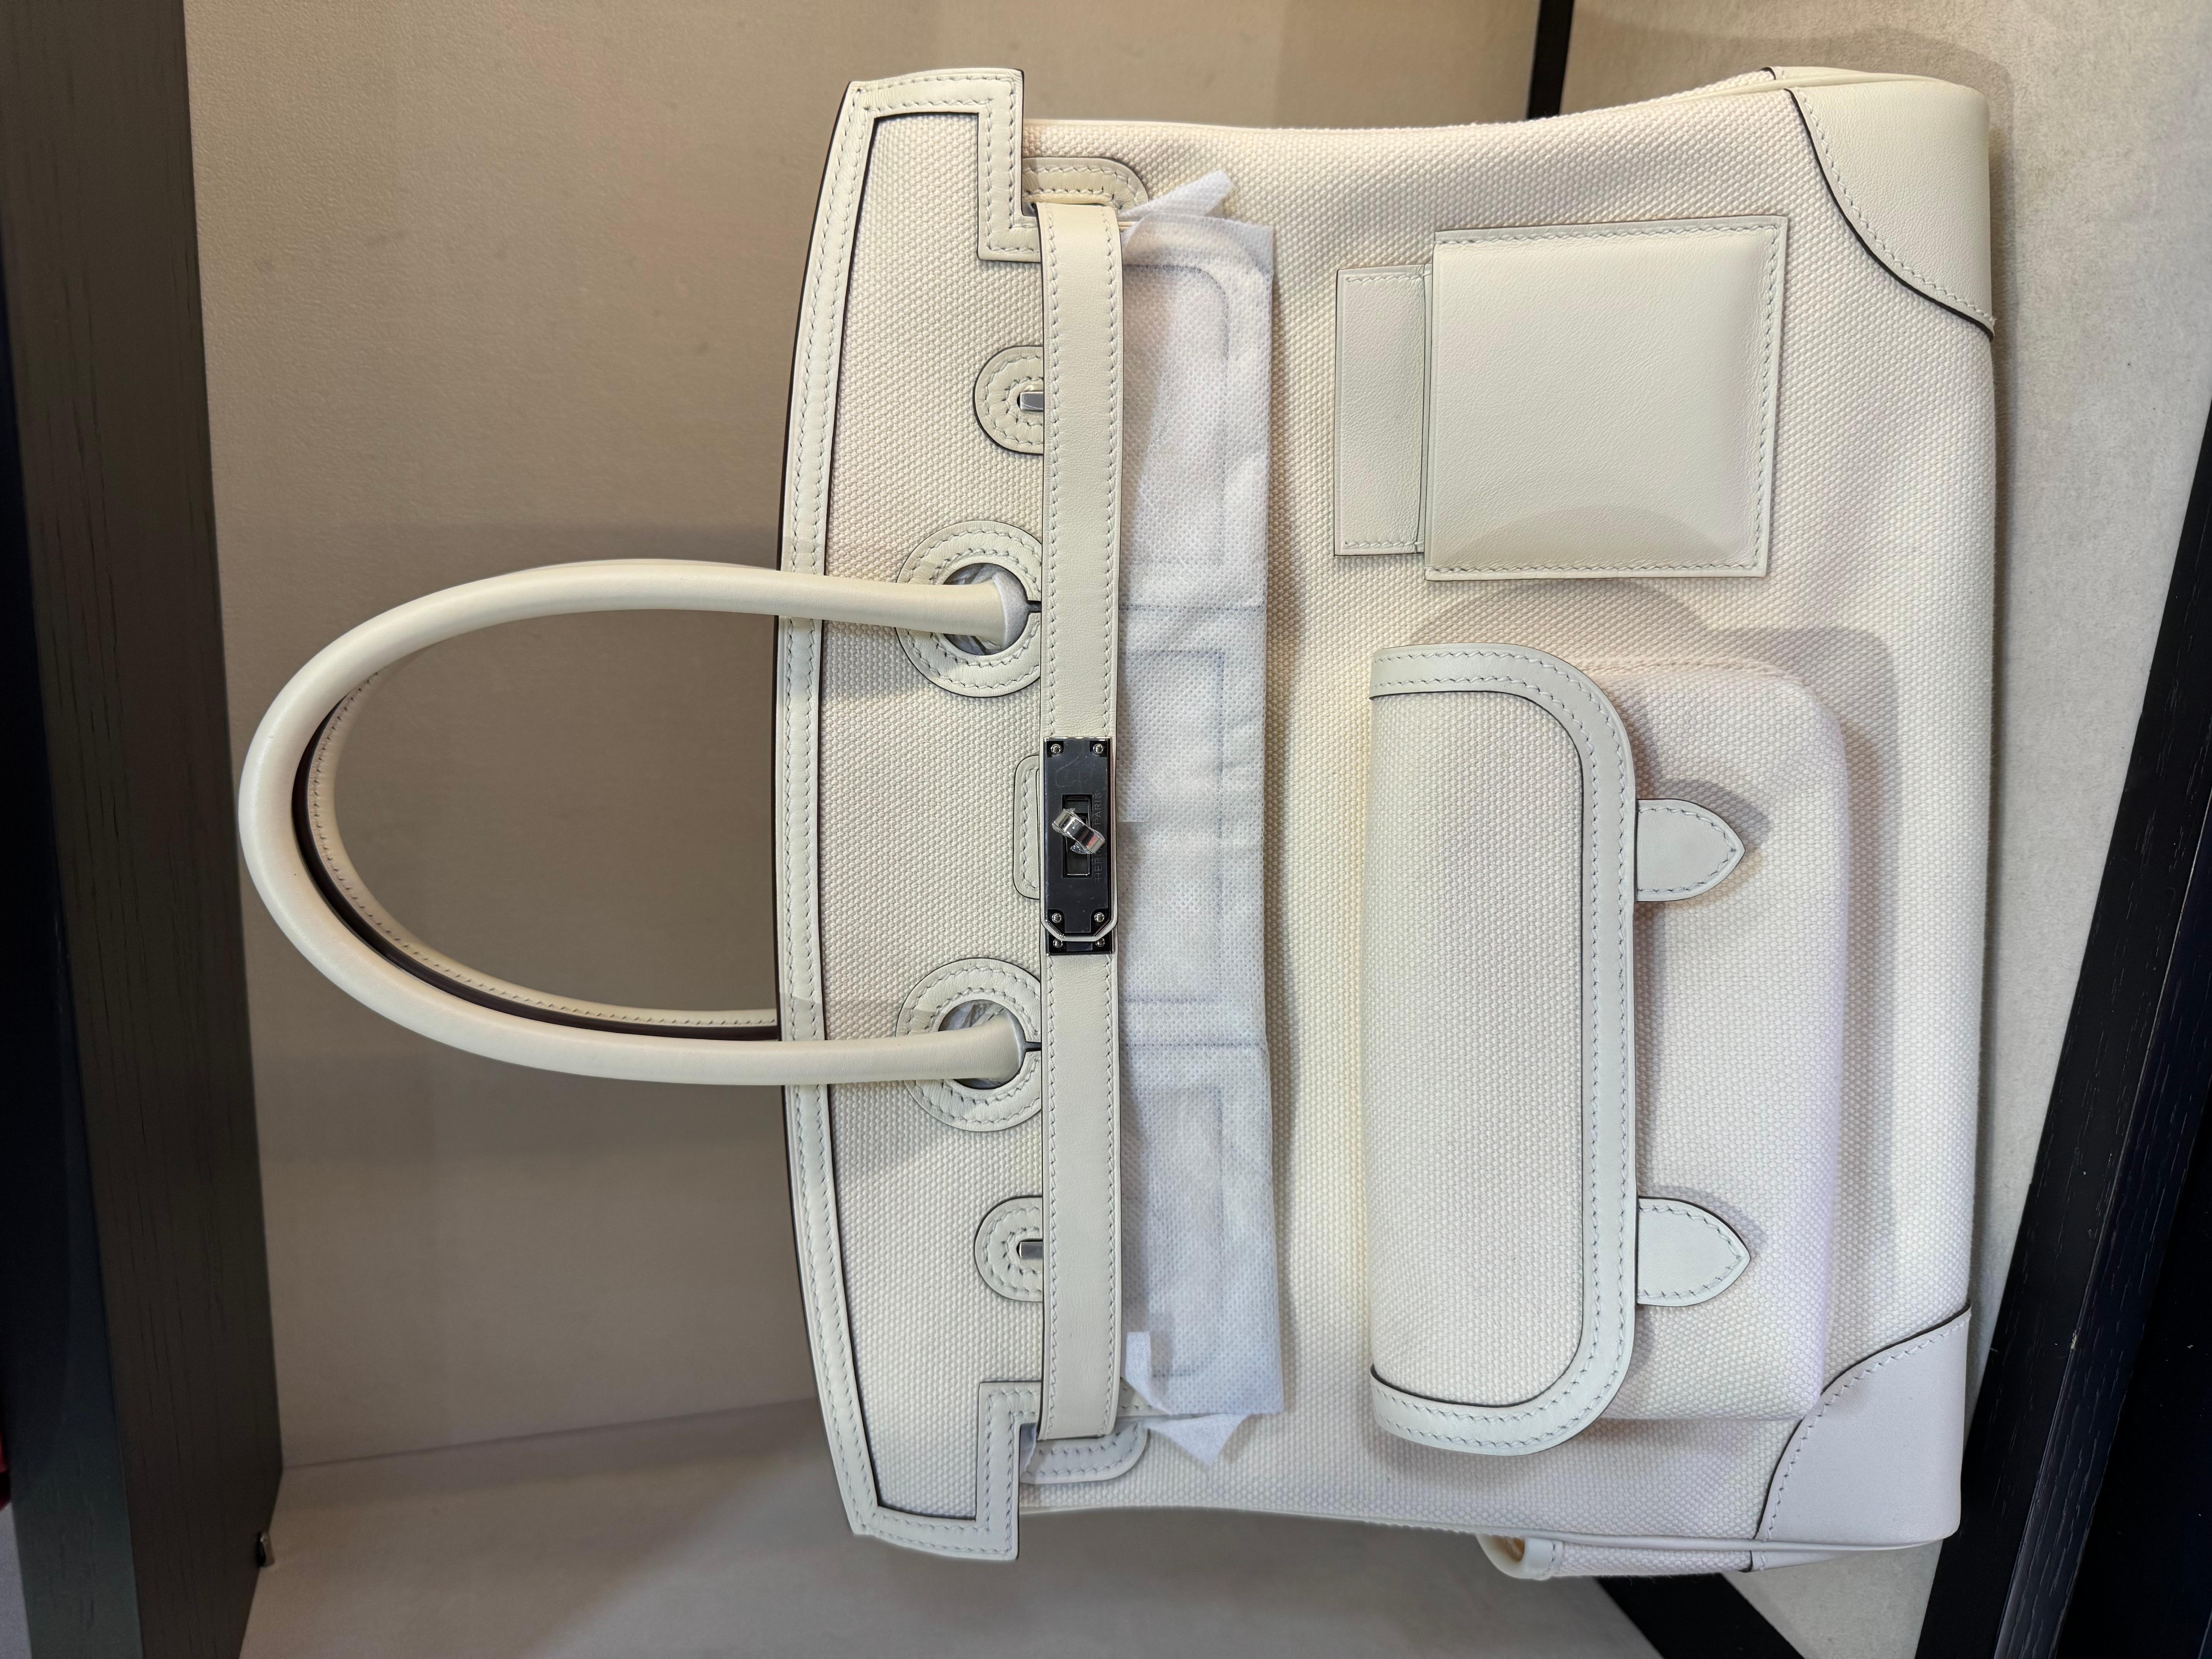 Hermès Cargo Birkin 35 Nata Toile and Swift Palladium Hardware, Z stamp. Very rare bag and a limited edition.
The interior is lined with tonal canvas and leather
Includes lock, two keys, clochette, clochette dust bag, removable card case, and dust